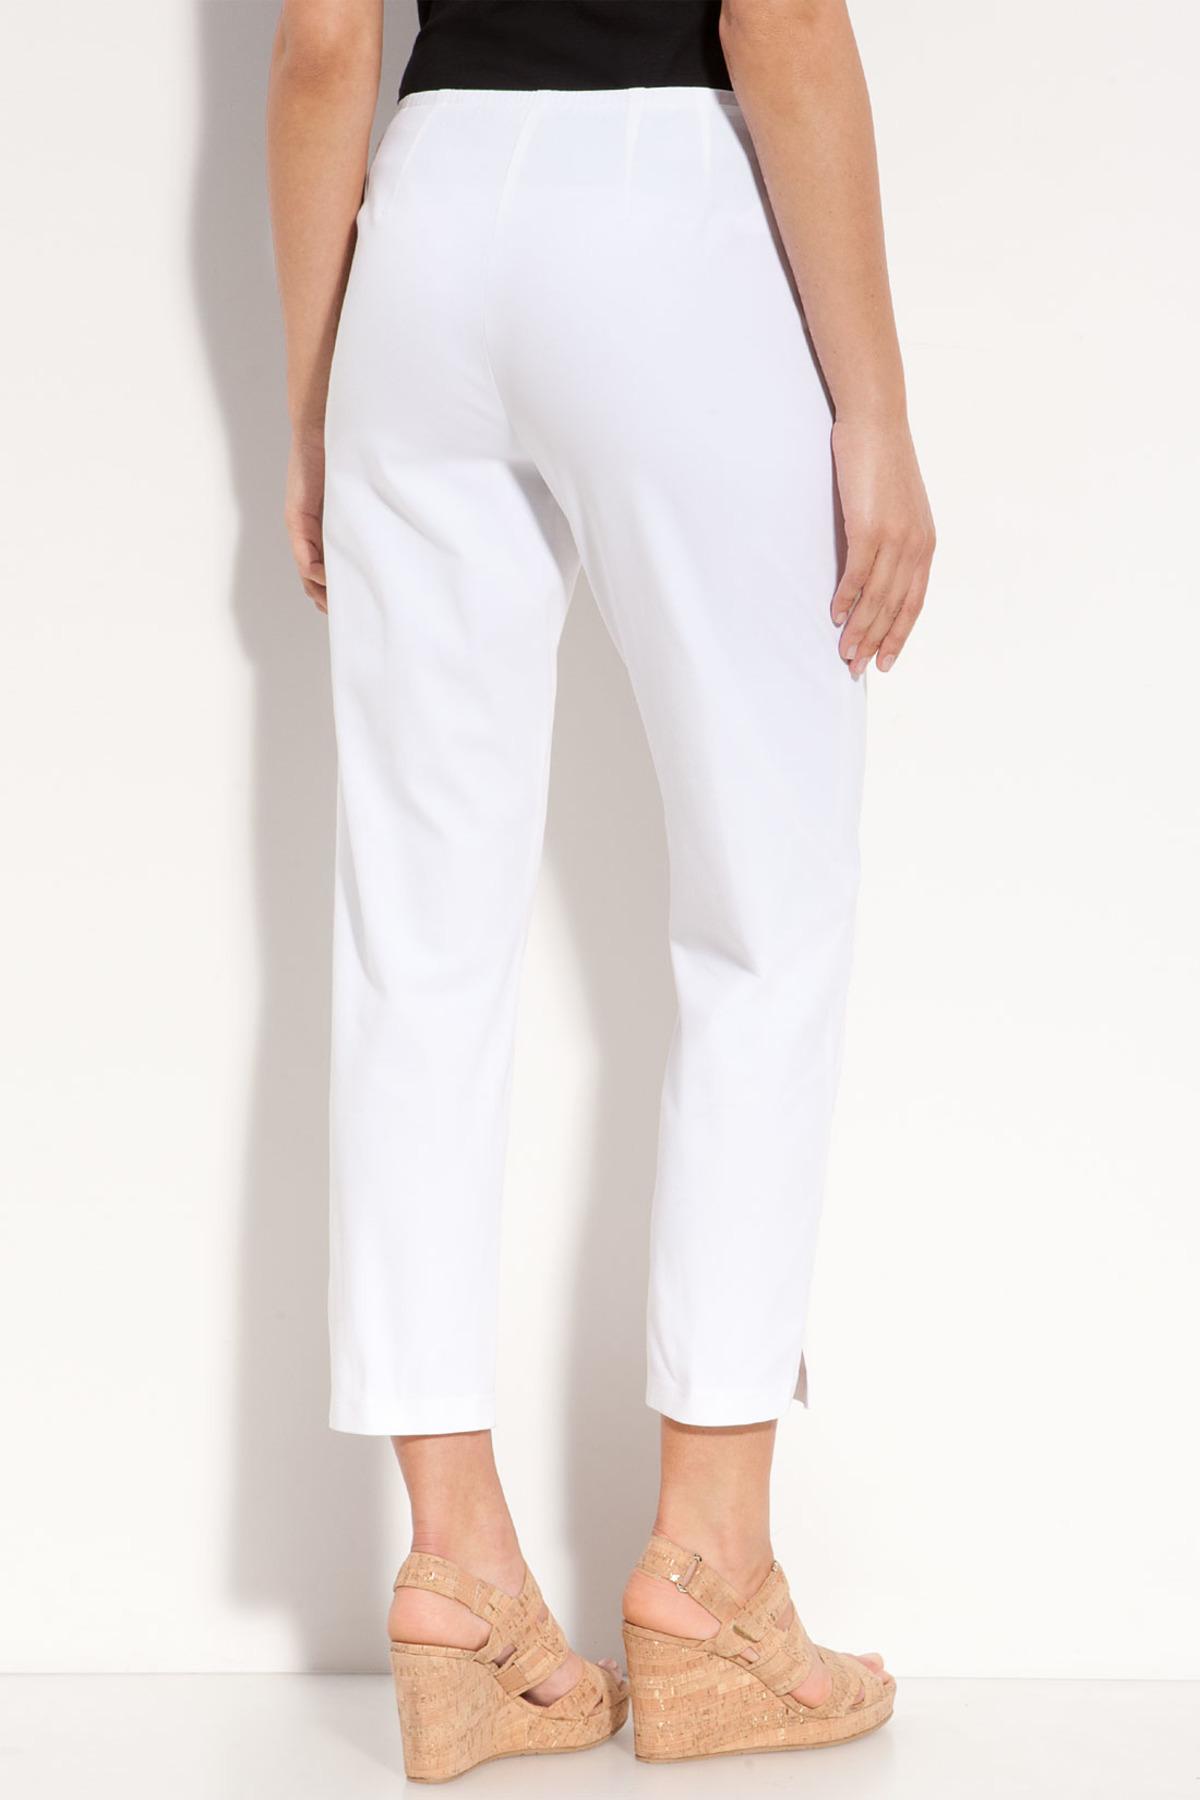 Eileen fisher Organic Stretch Cotton Twill Ankle Pants (petite) in ...